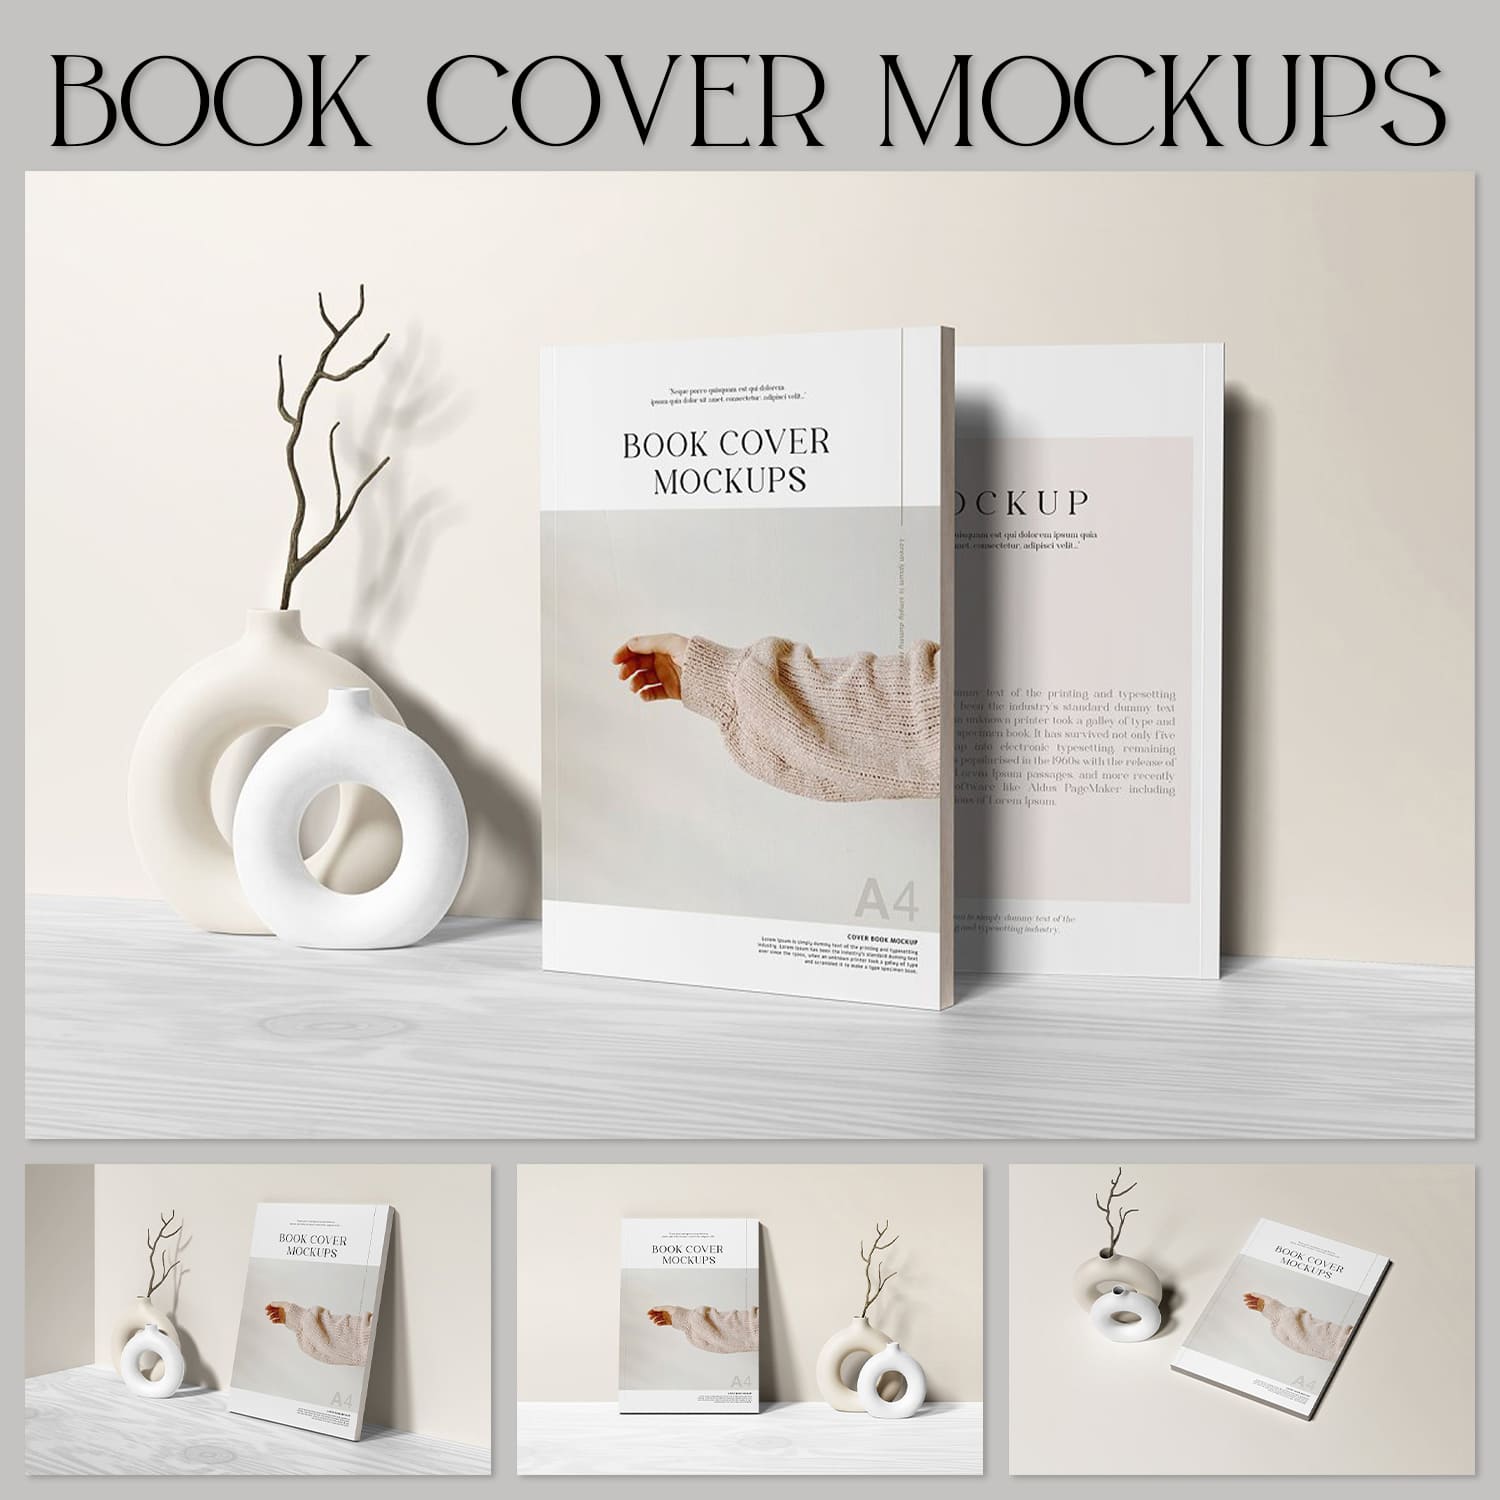 Set of images of books with charming cover.